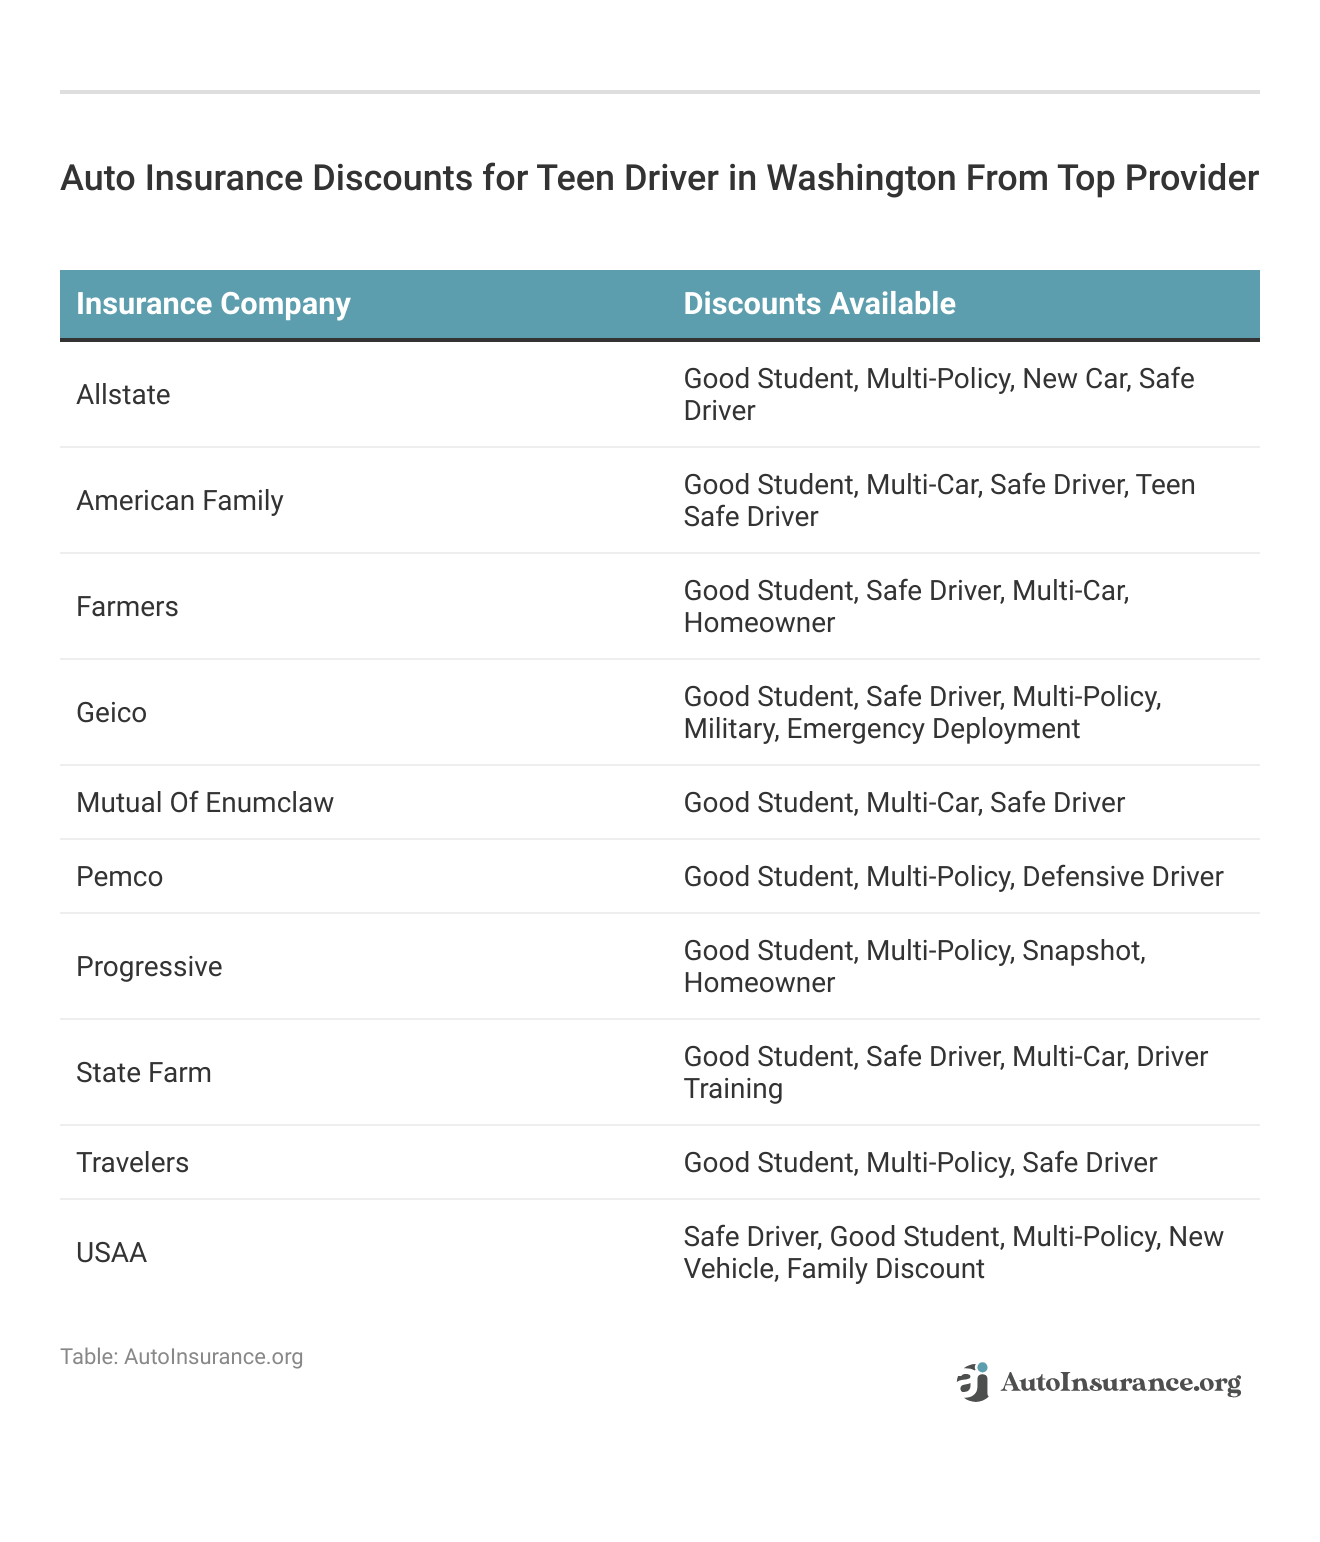 <h3>Auto Insurance Discounts for Teen Driver in Washington From Top Provider</h3>